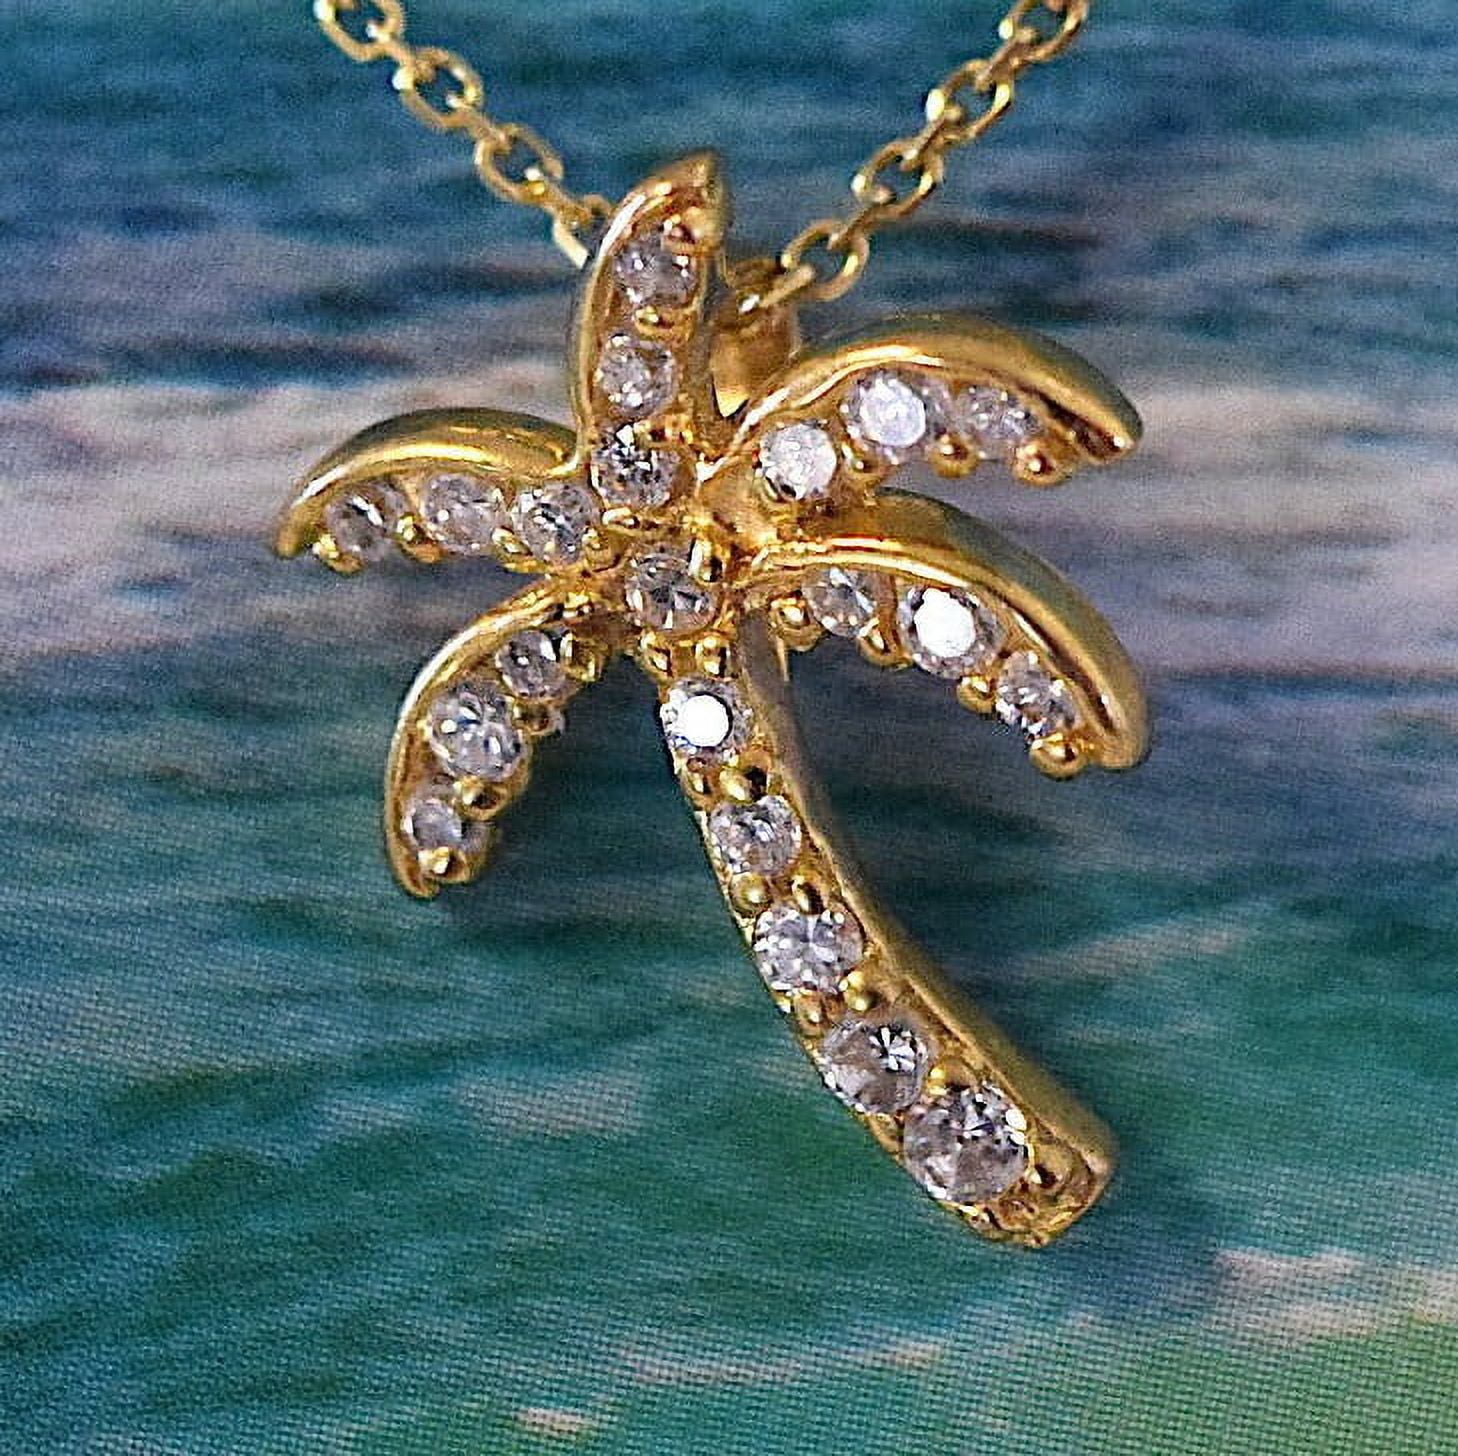 Beautiful Hawaiian Palm Tree Necklace, Sterling Silver Yellow-Gold Plated  Palm Tree CZ Pendant, N2064 Birthday Wife Mom Valentine Gift